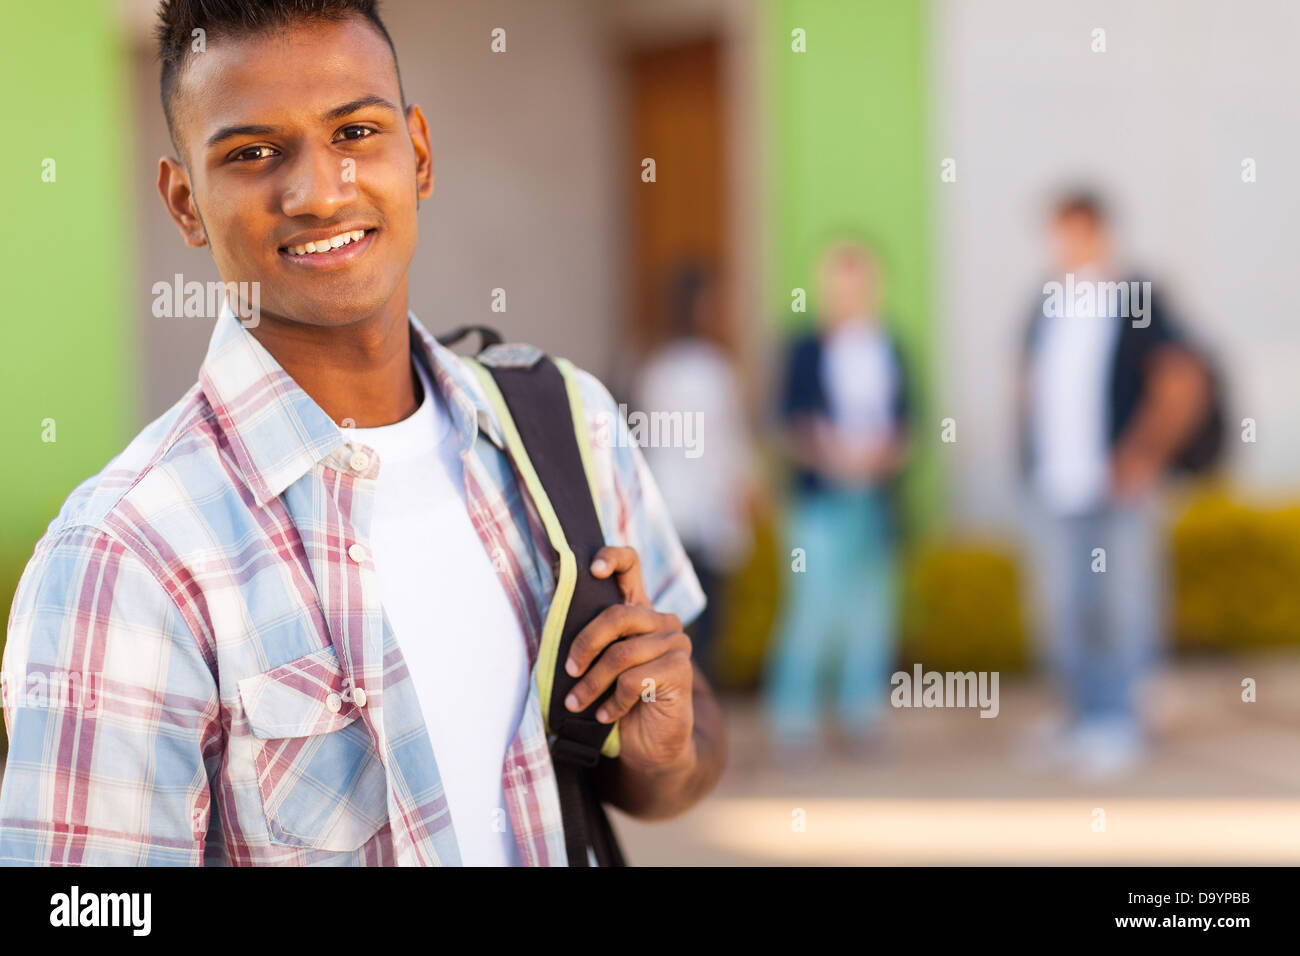 portrait of male Indian high school student with schoolbag Stock Photo